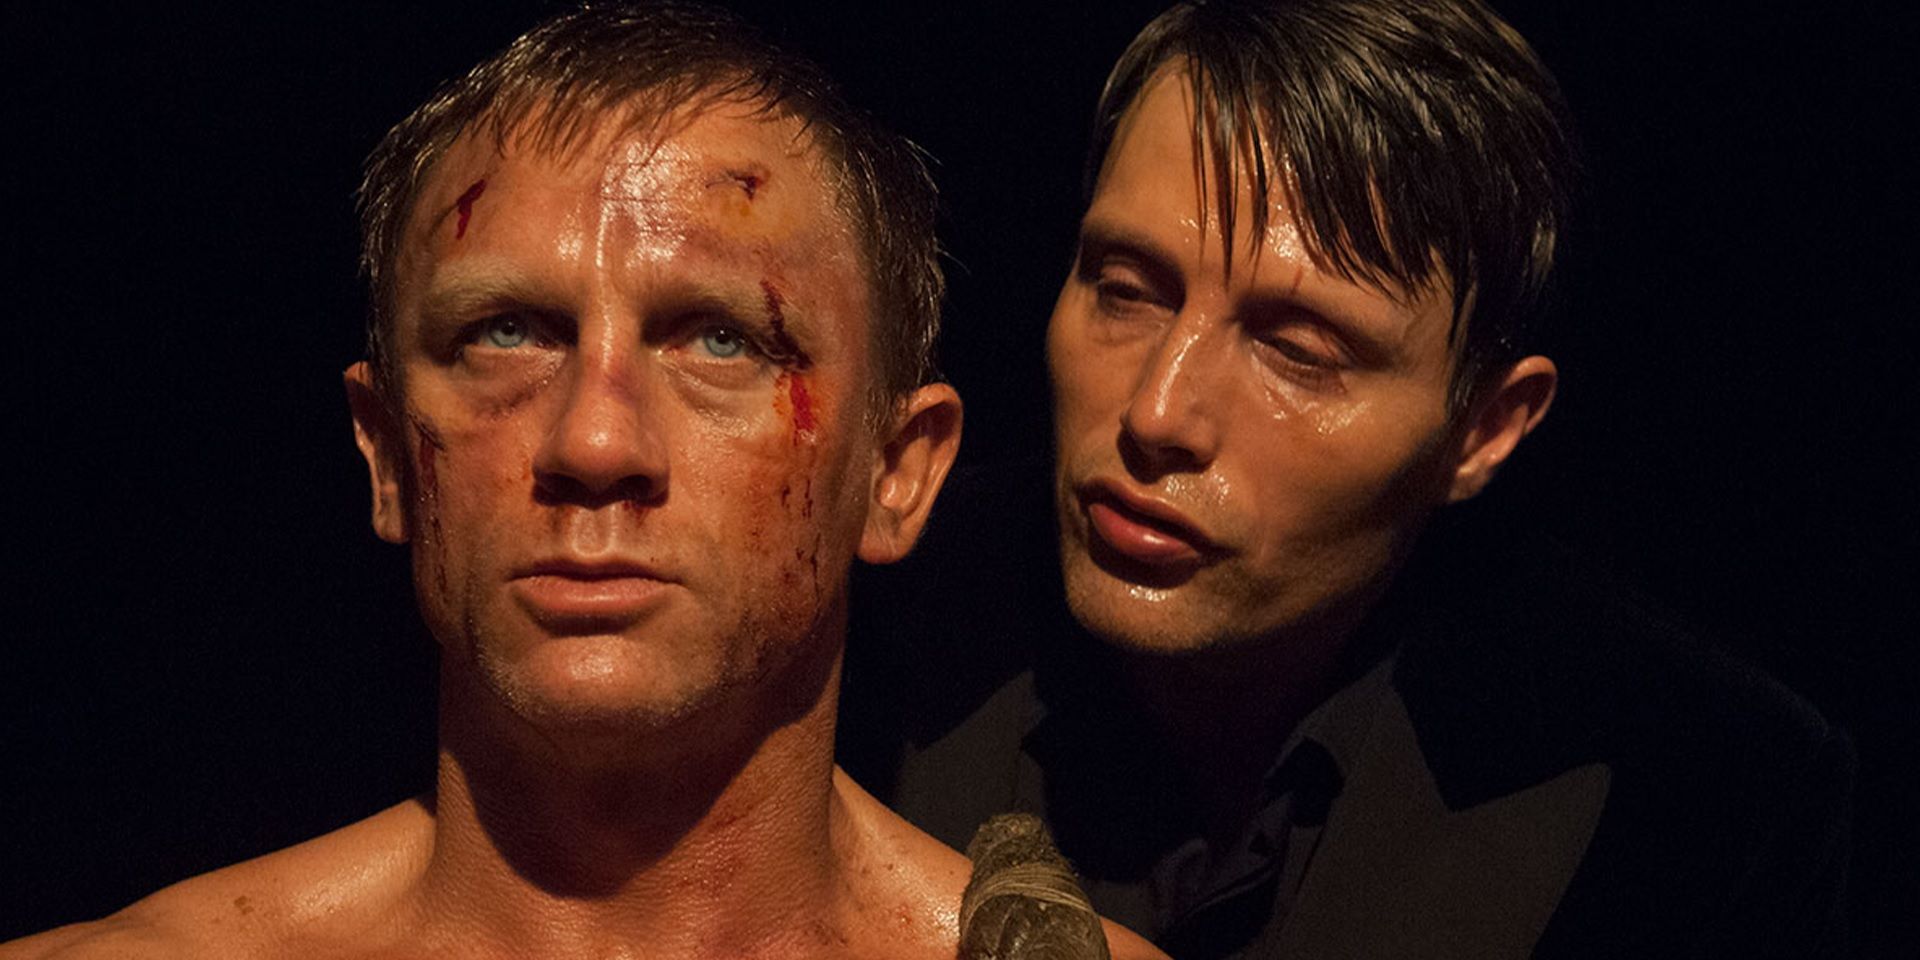 Daniel Craig and Mads Mikkelsen in a dark room in Casino Royale